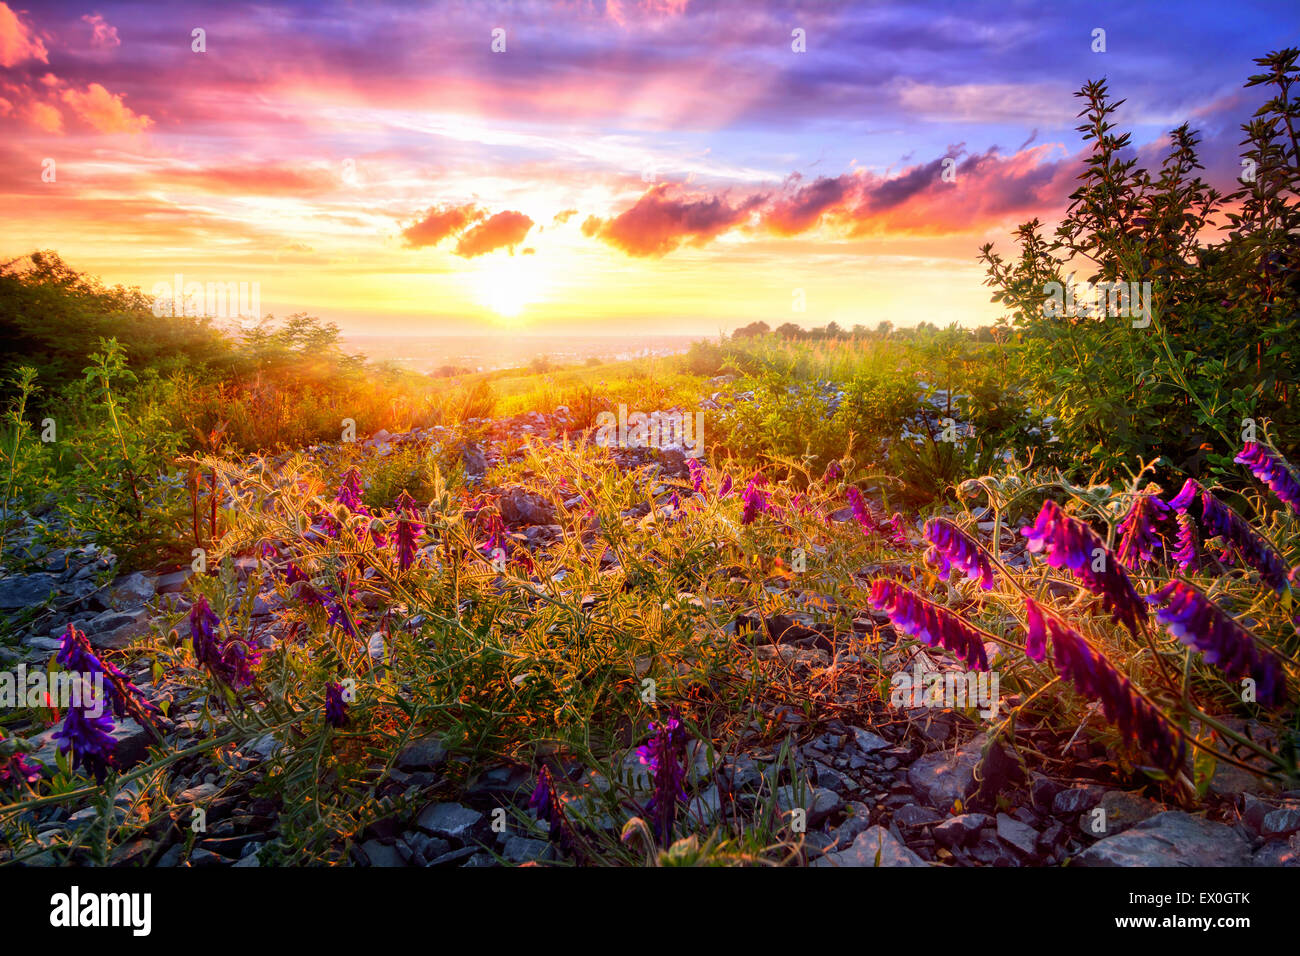 Scenic sunset landscape with mixed vegetation in the warm sunlight and the colorful sky in the background Stock Photo